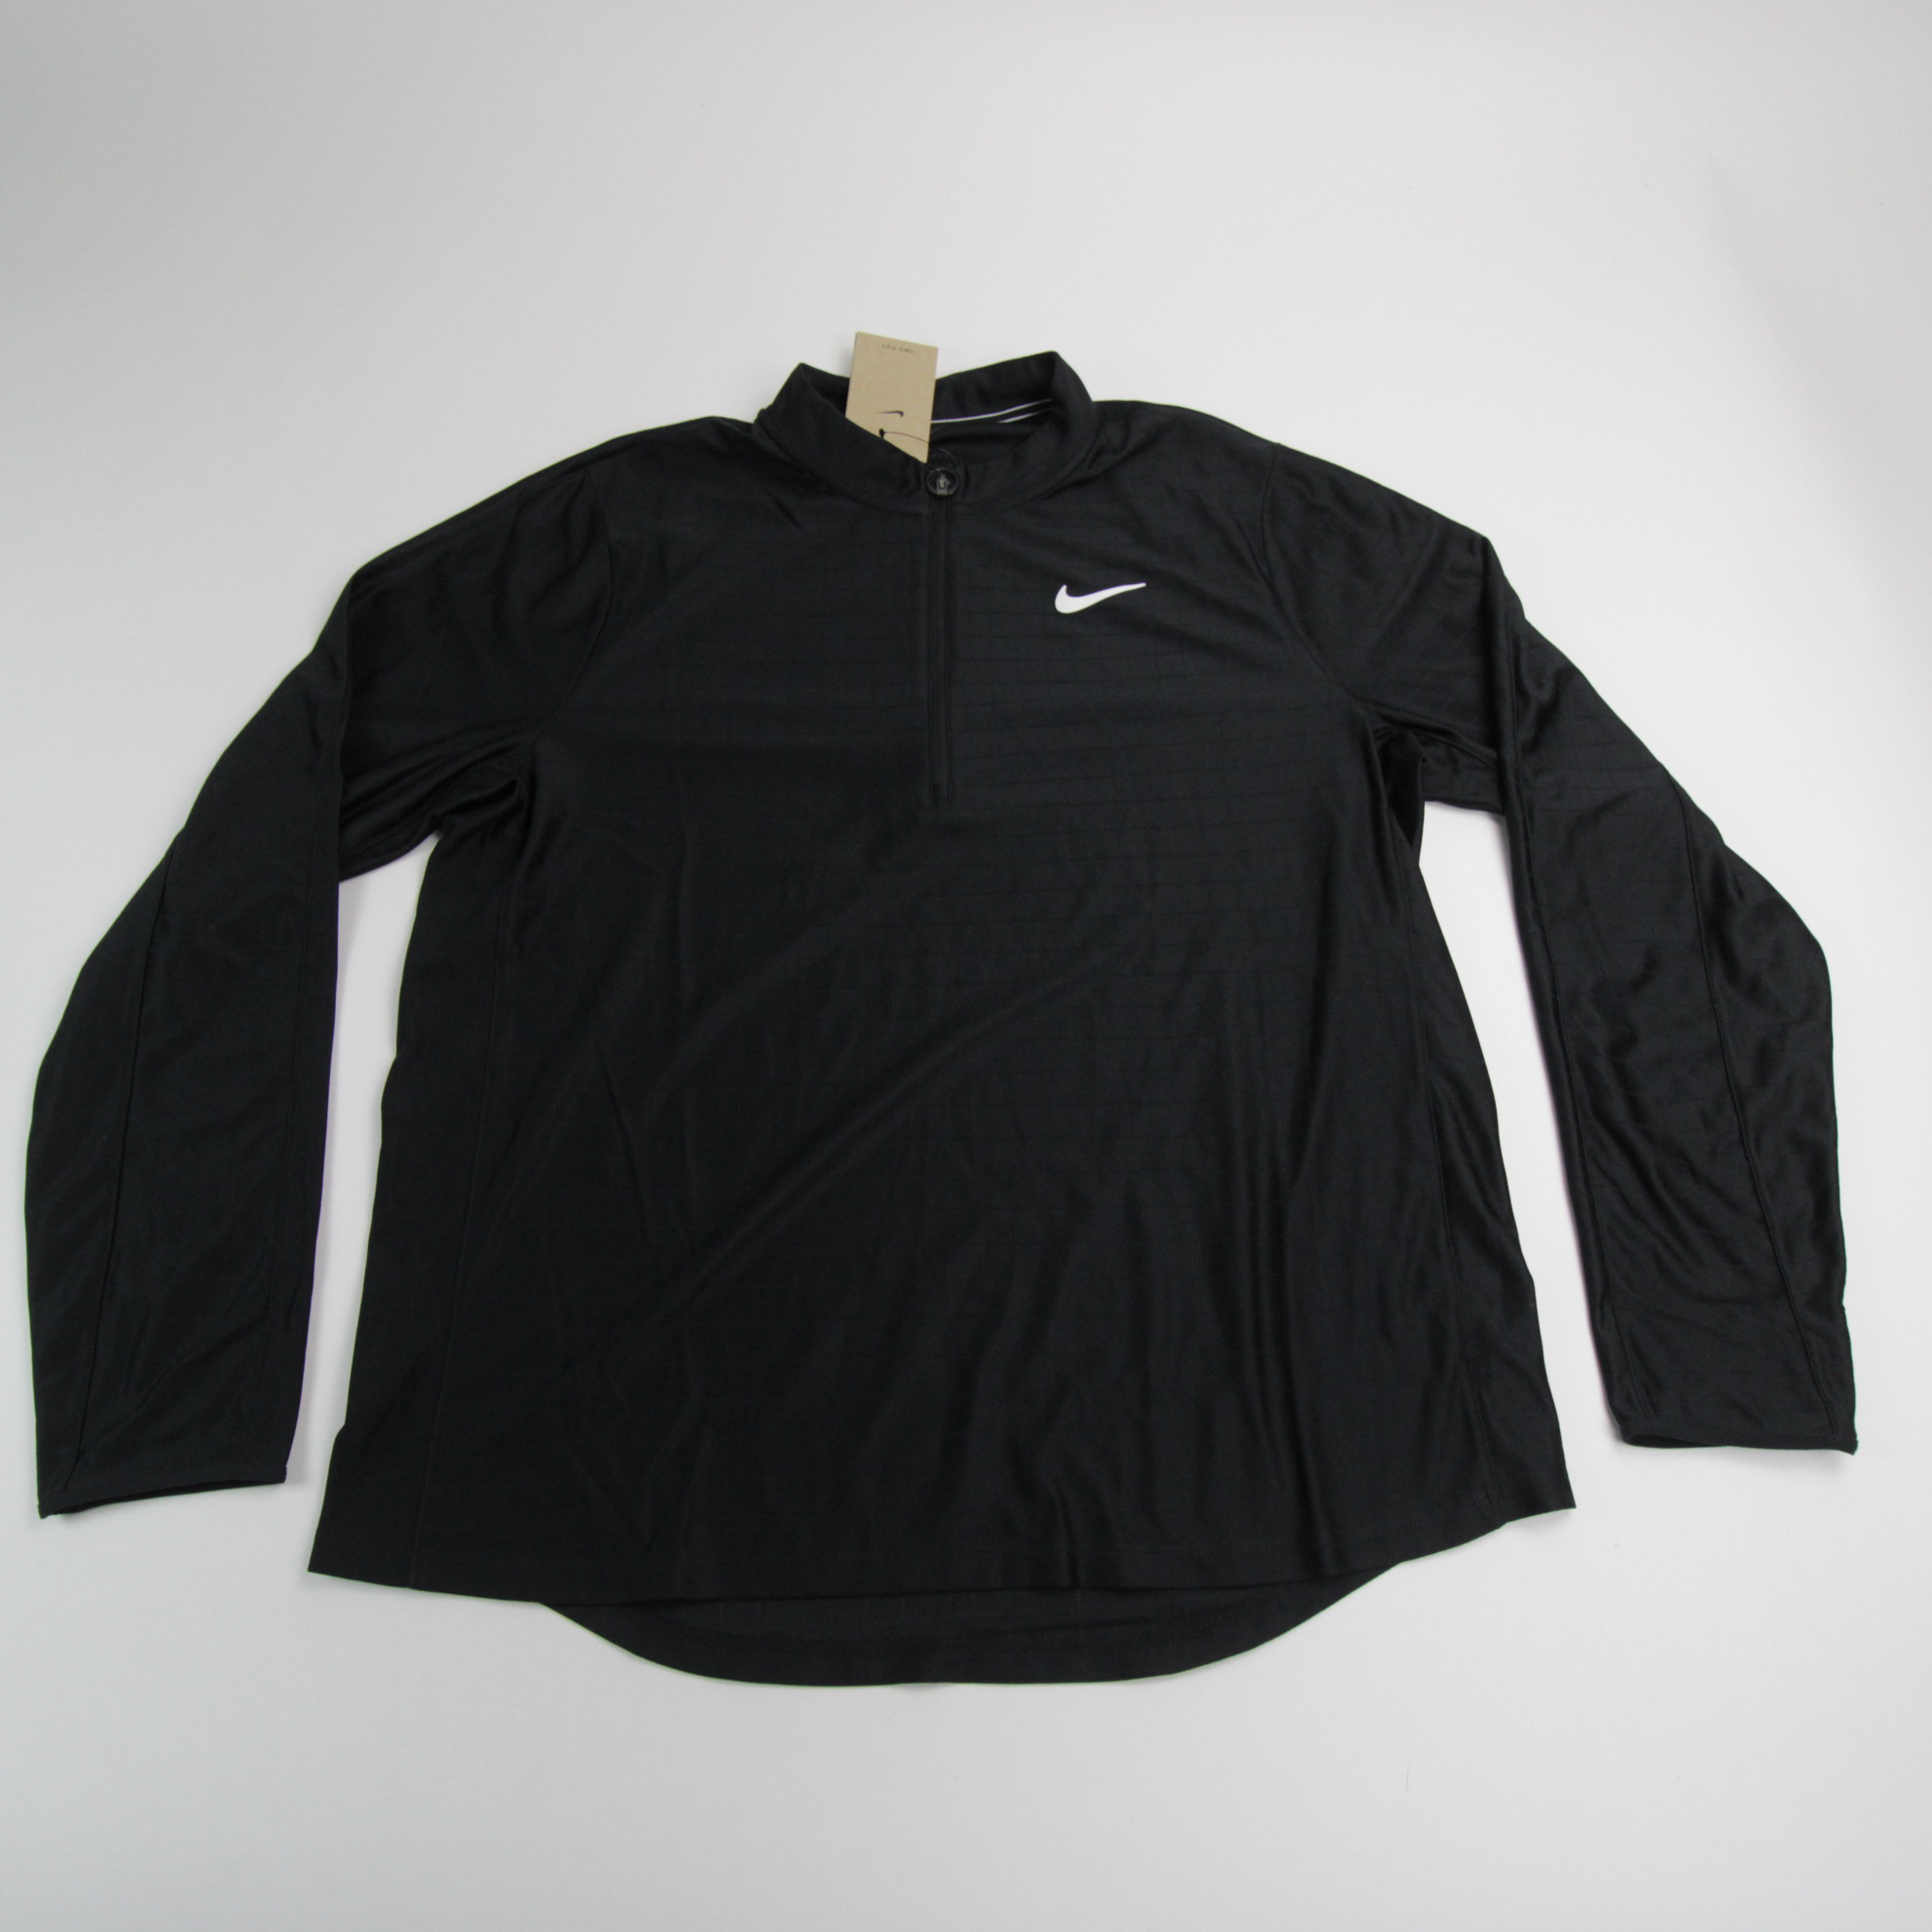 Nike Dri-Fit Pullover Men's Black New with Tags | eBay